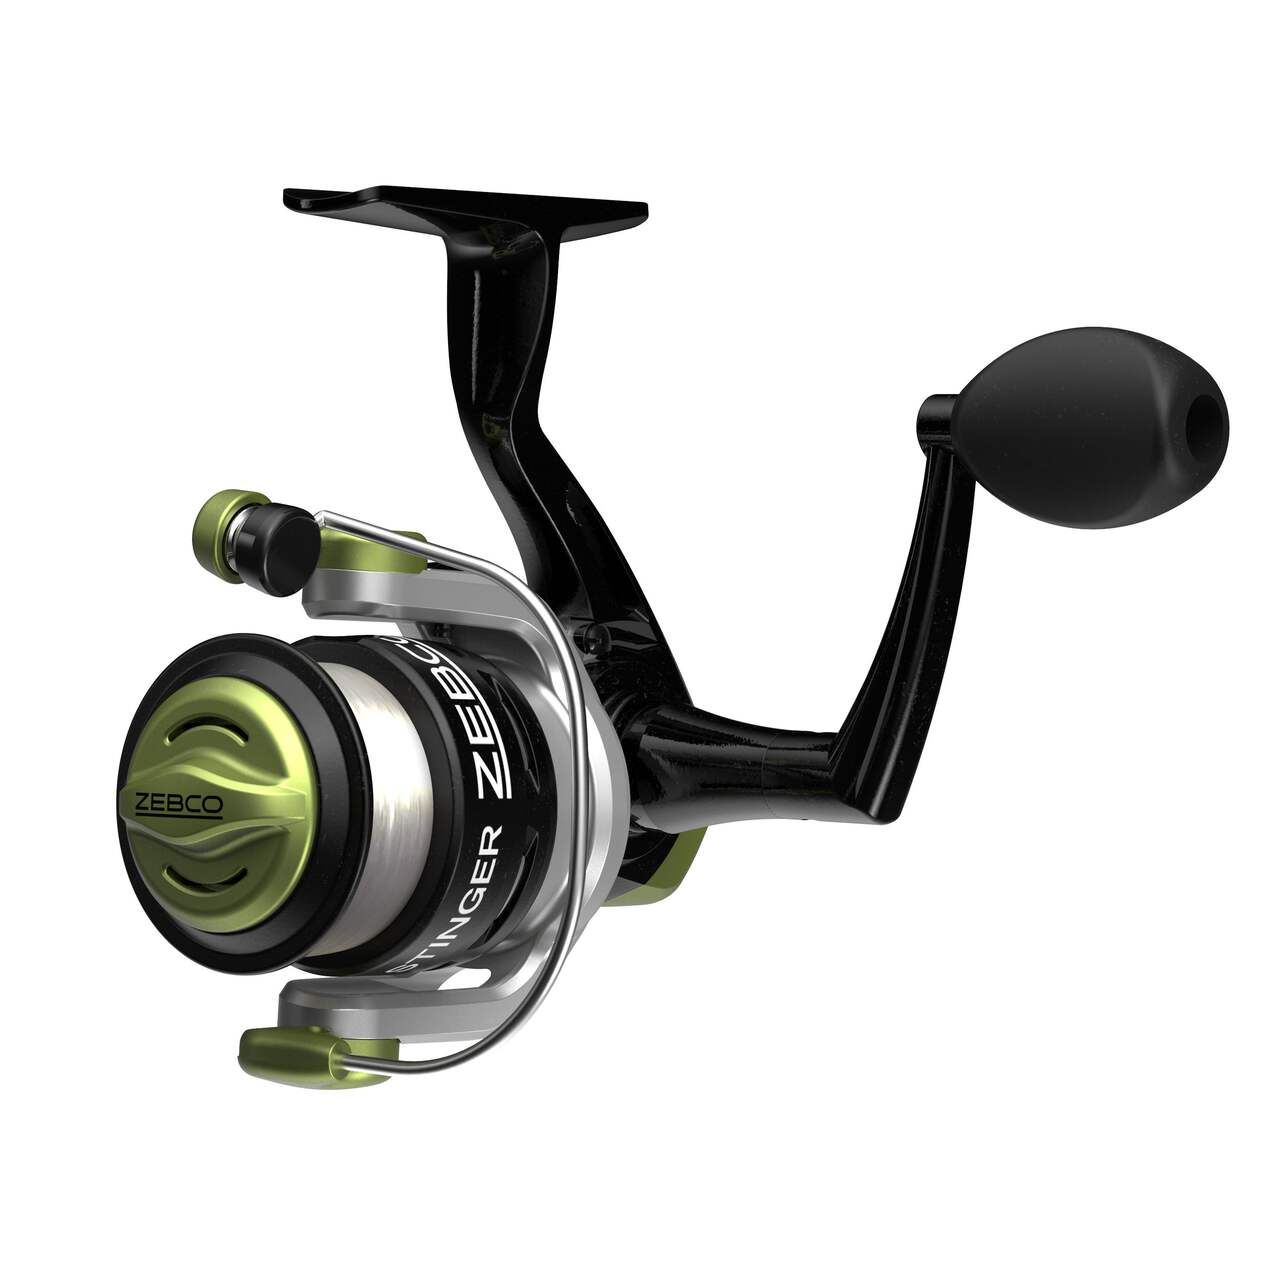 Zebco Fishing Stinger Size 20 Spinning Reel 5.3:1 Pre-Spooled With 8 LB  Line